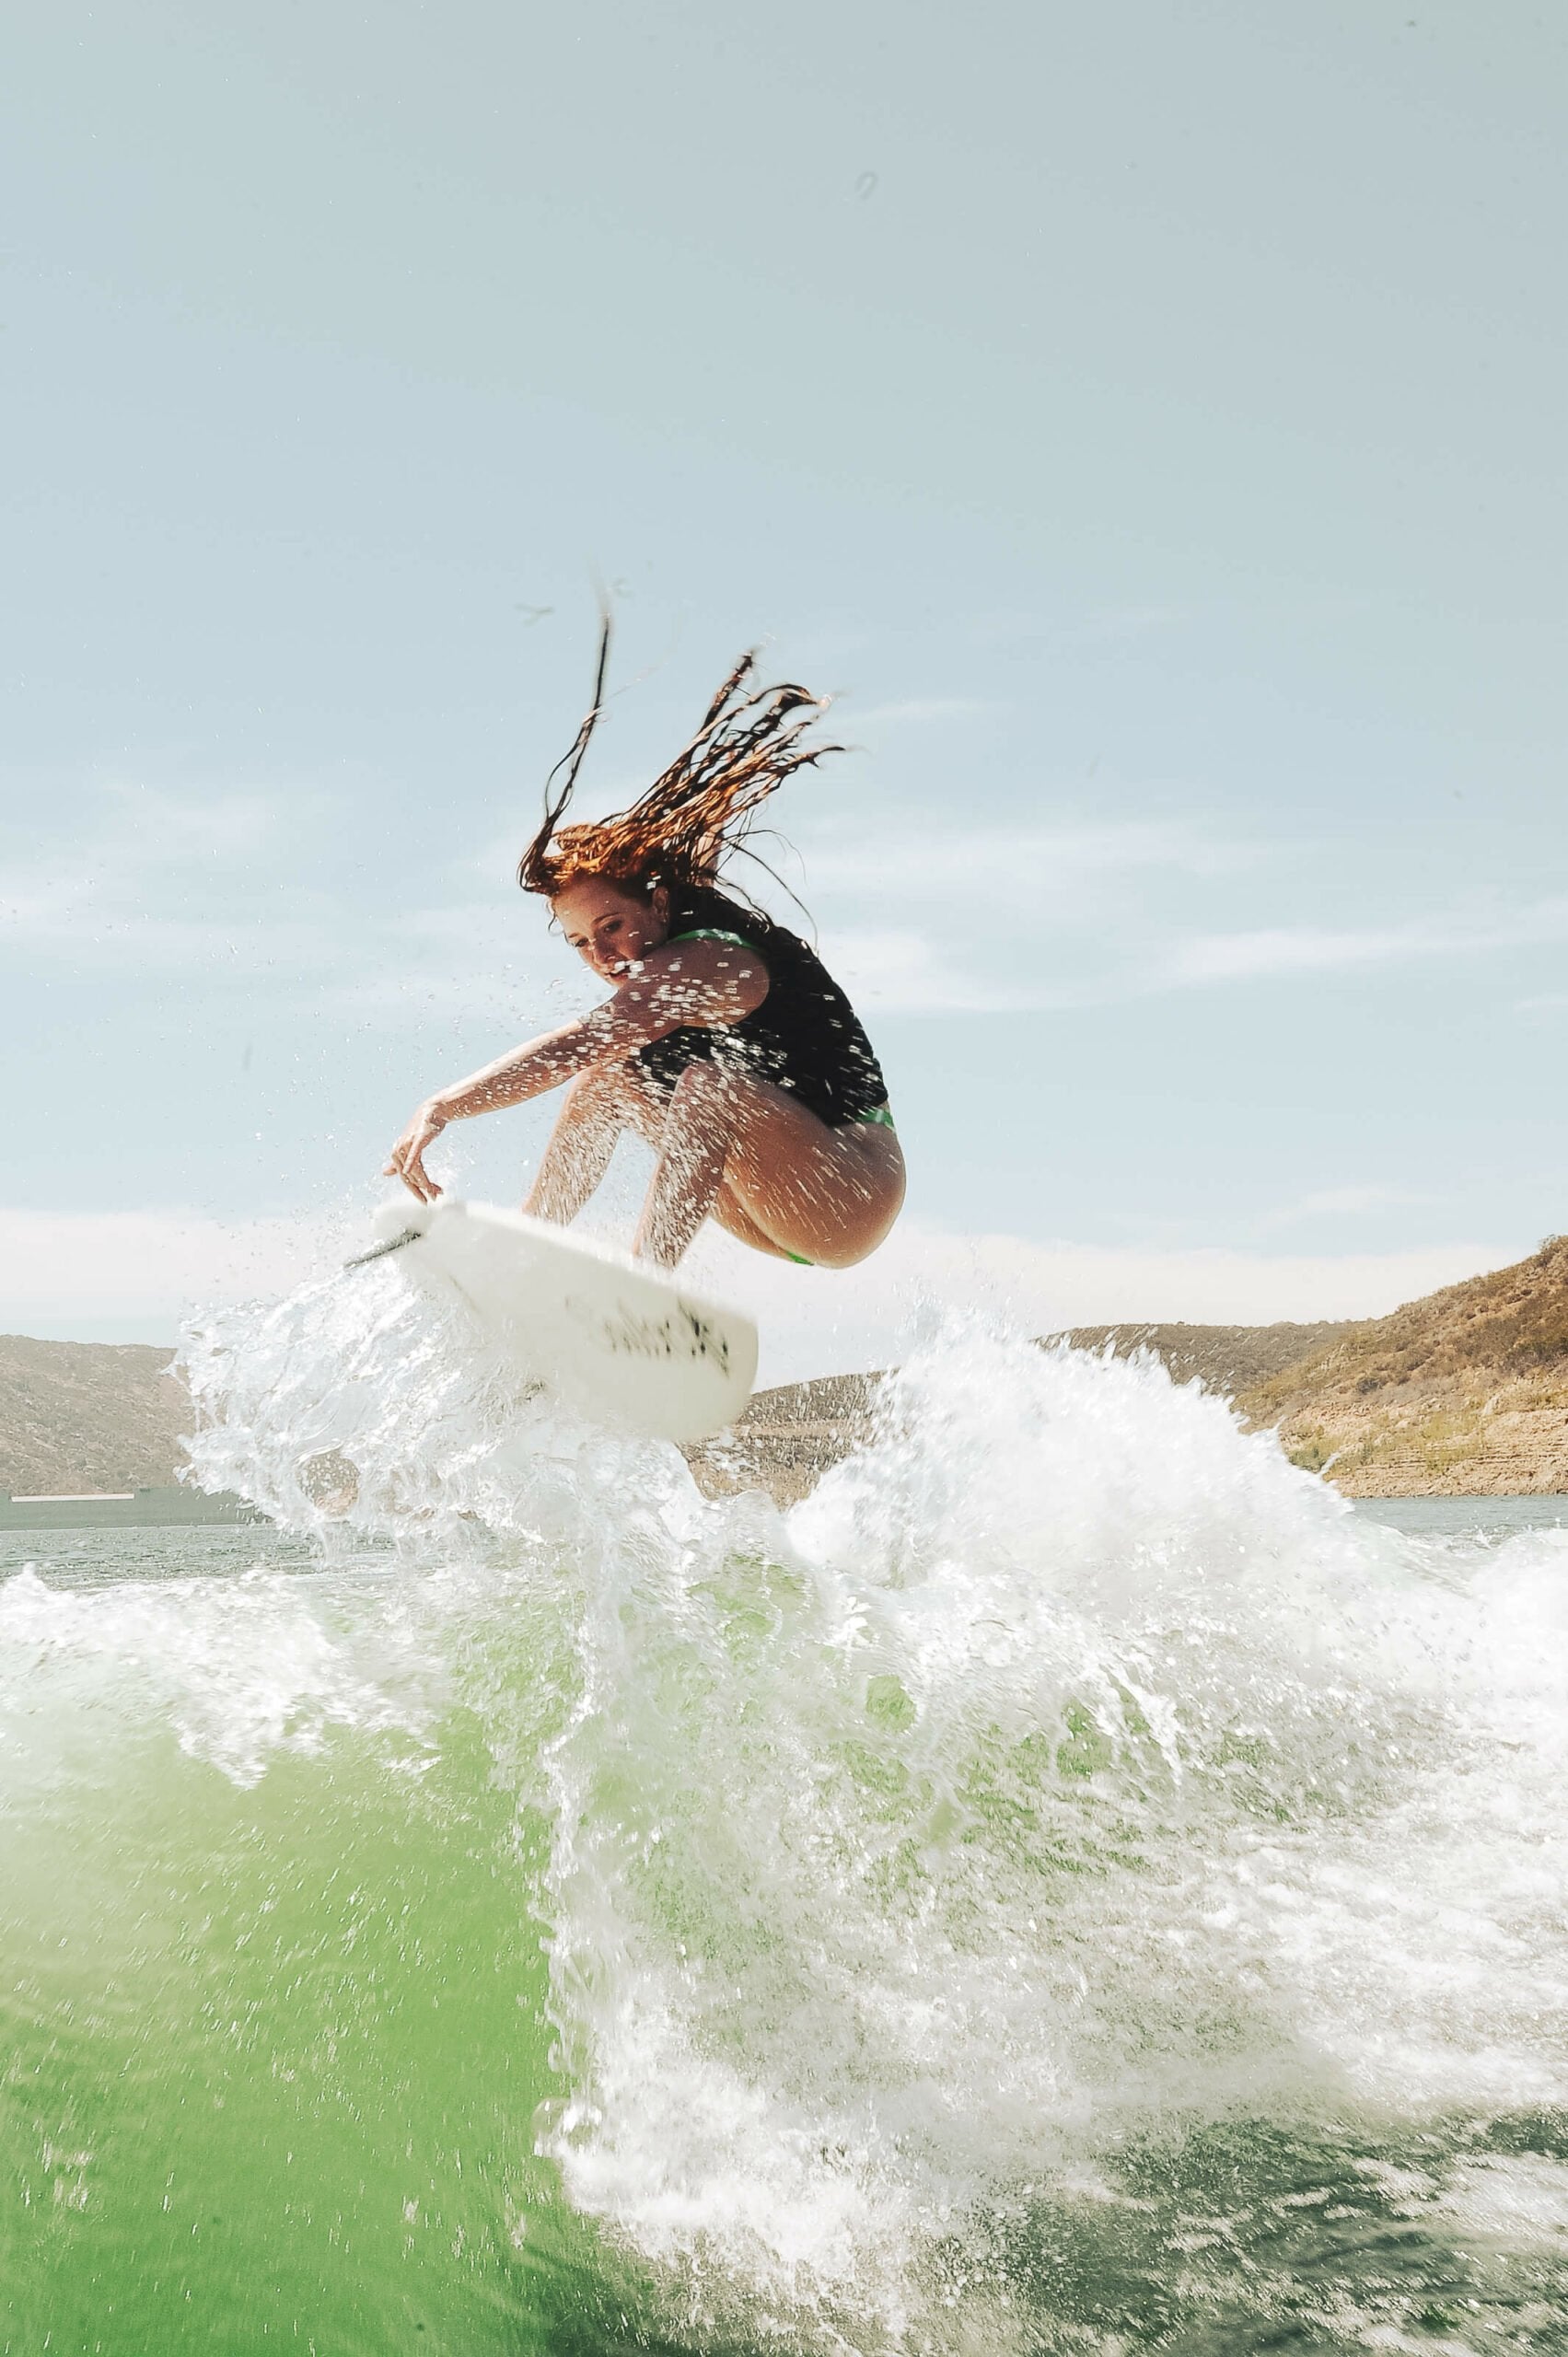 An intermediate rider is skillfully controlling the speed generation while riding a wave on a Soulcraft Control Freak Wakesurf Board.